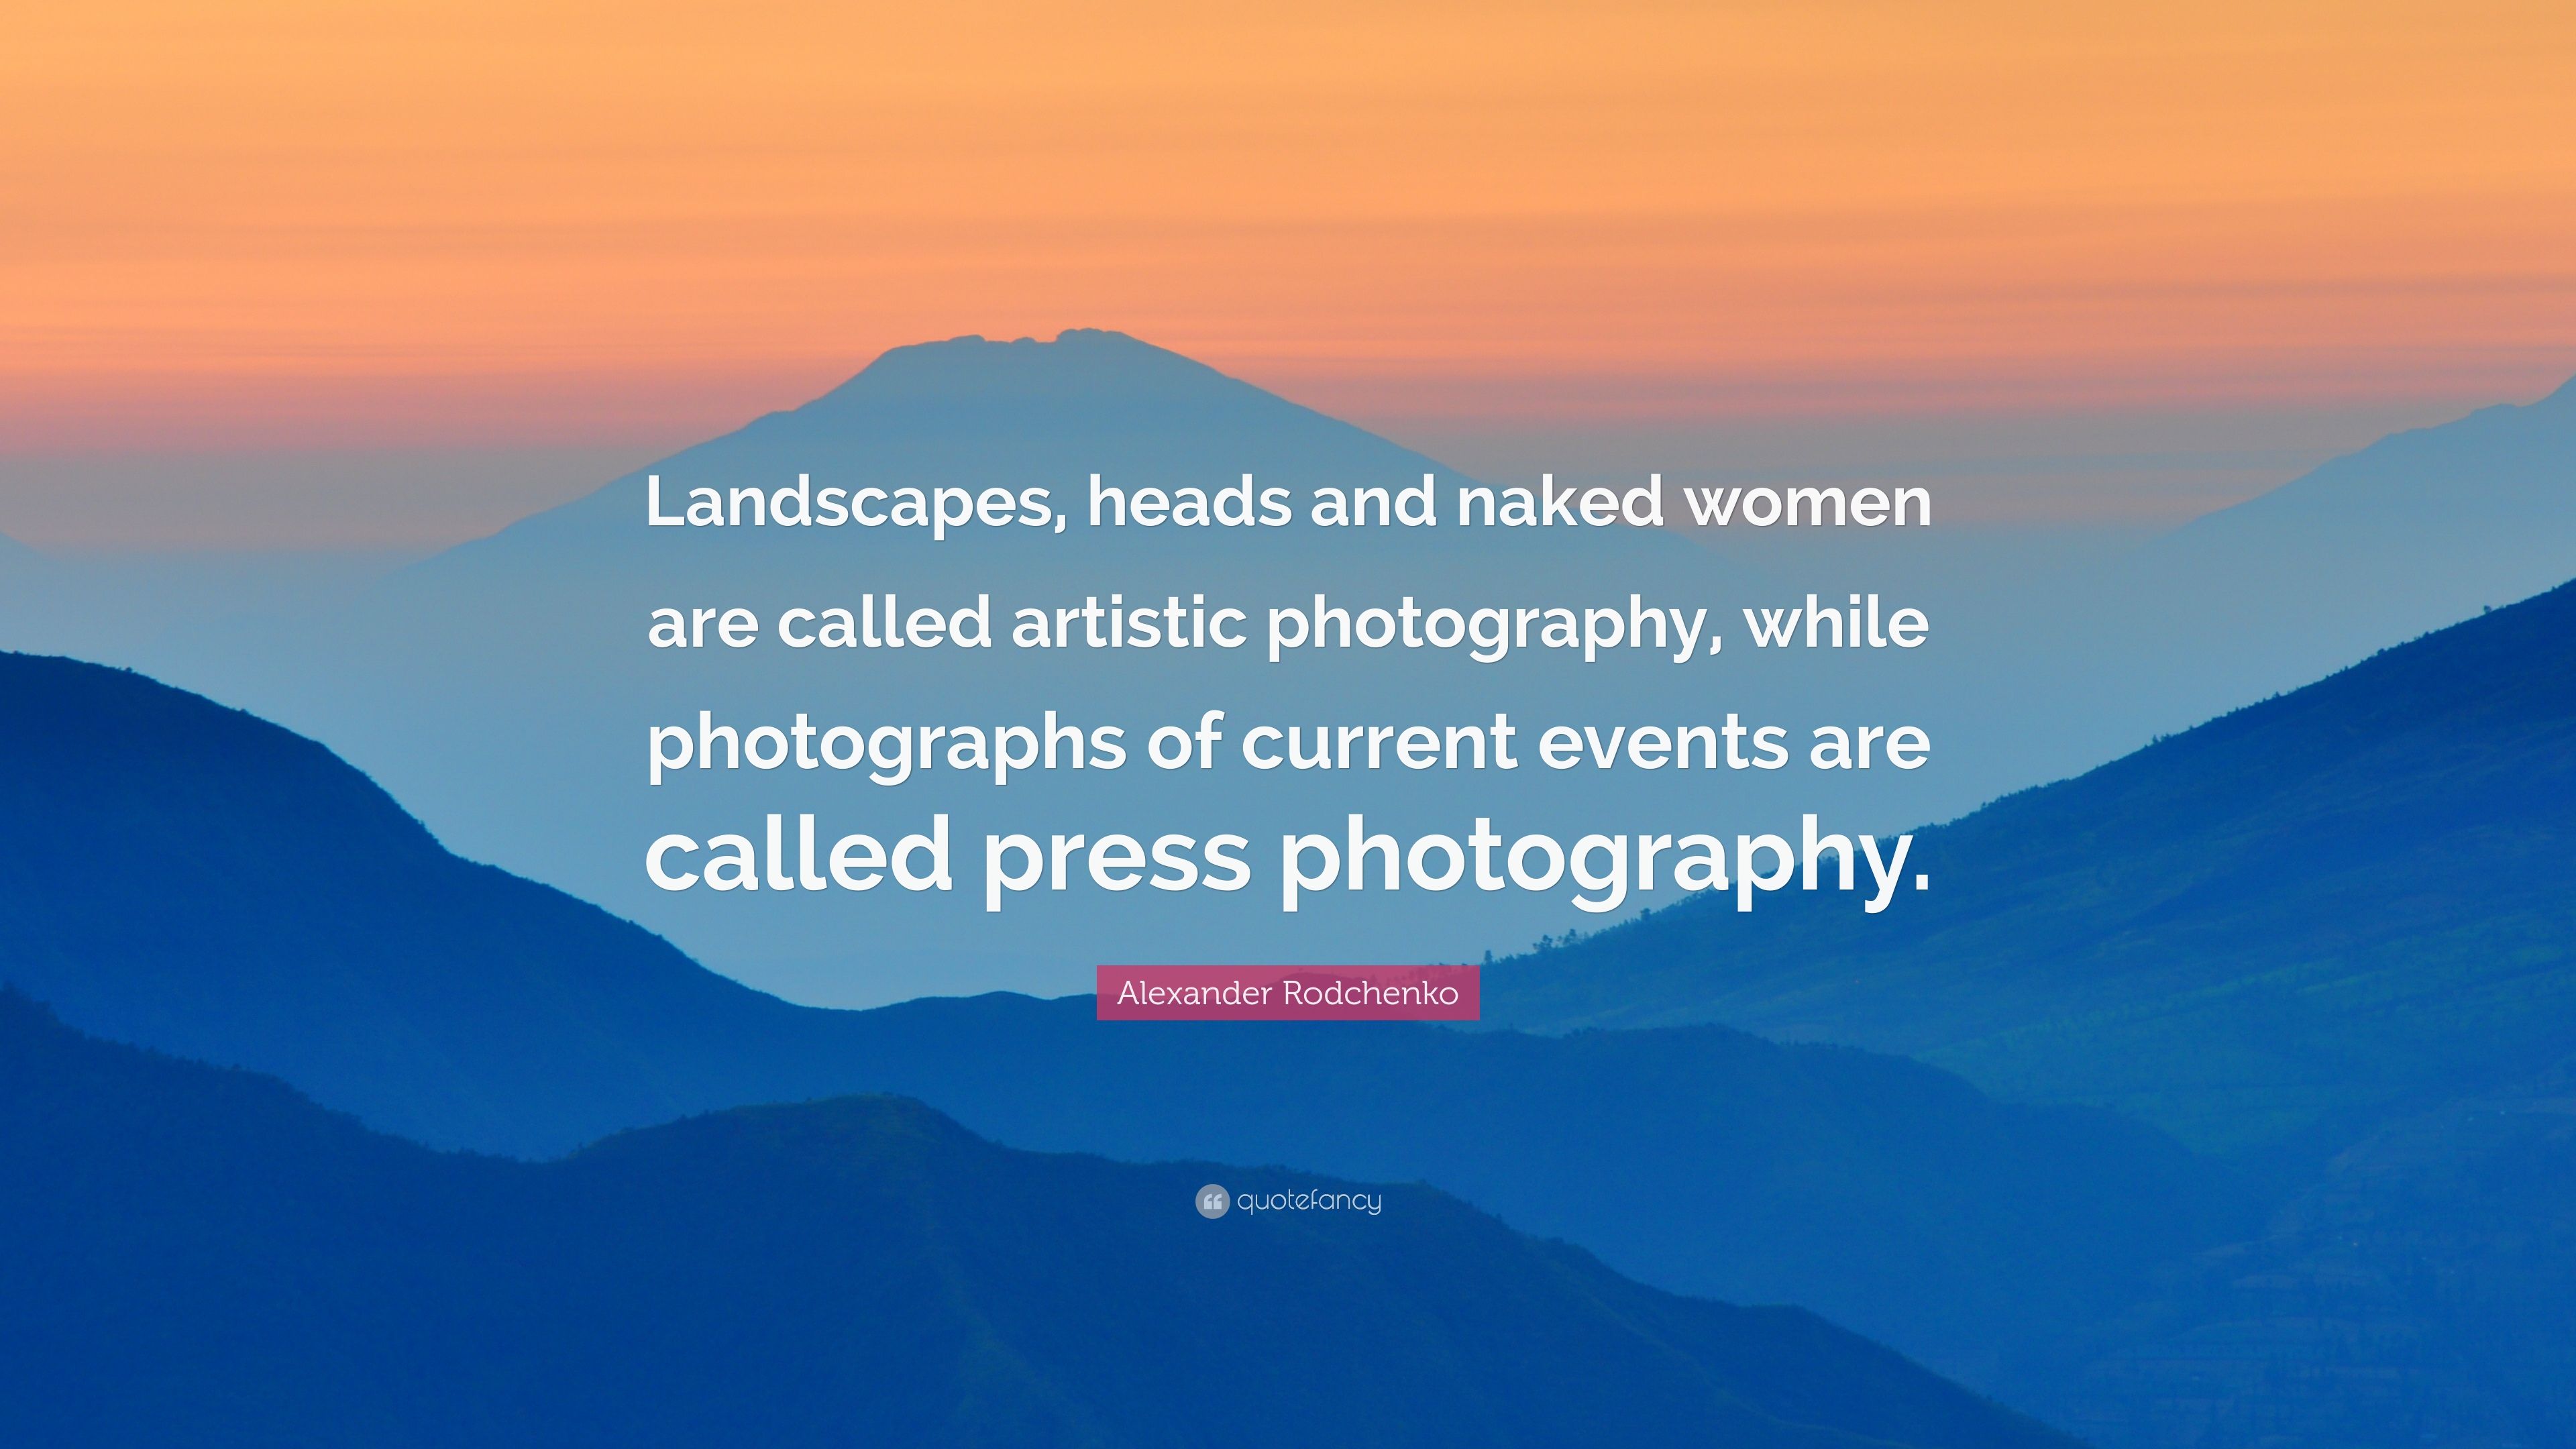 Alexander Rodchenko Quote: “Landscapes, heads and naked women are